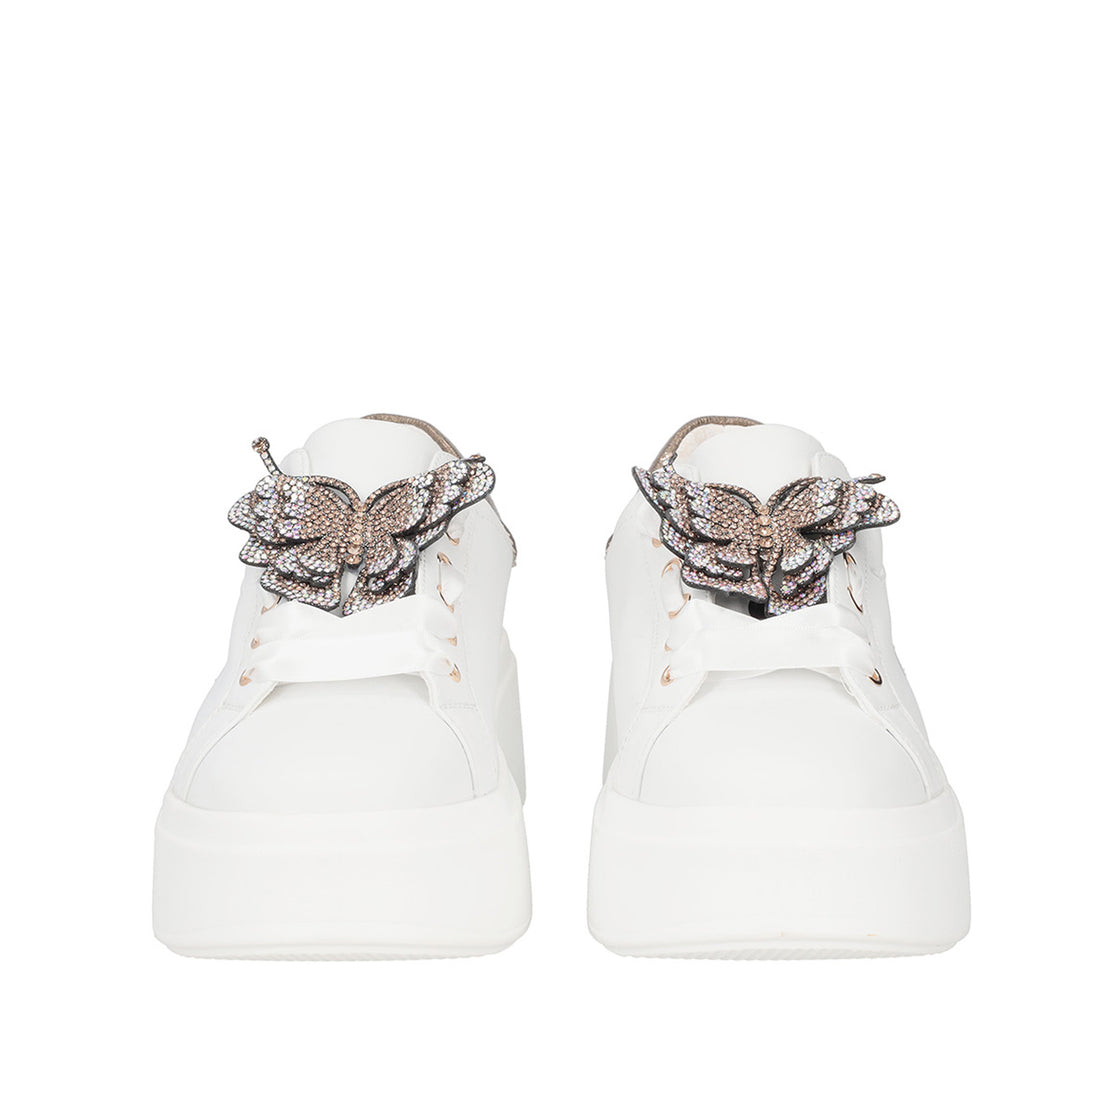 WHITE VANITY SNEAKER WITH JEWEL BUTTERFLY